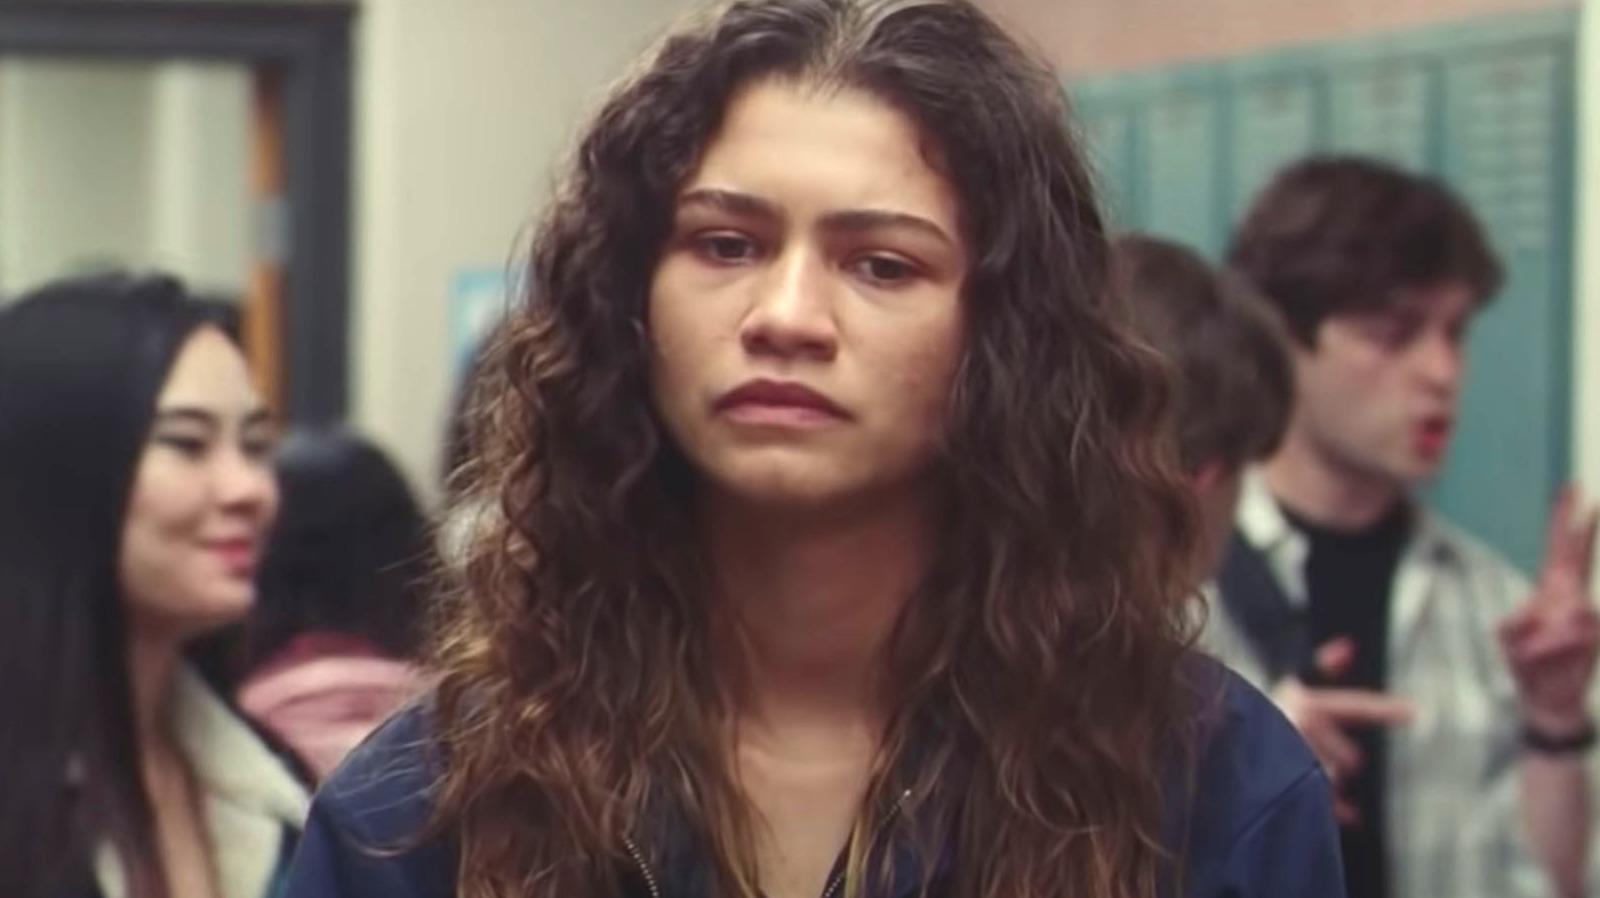 The 12 Best Zendaya Movies And TV Shows, Ranked